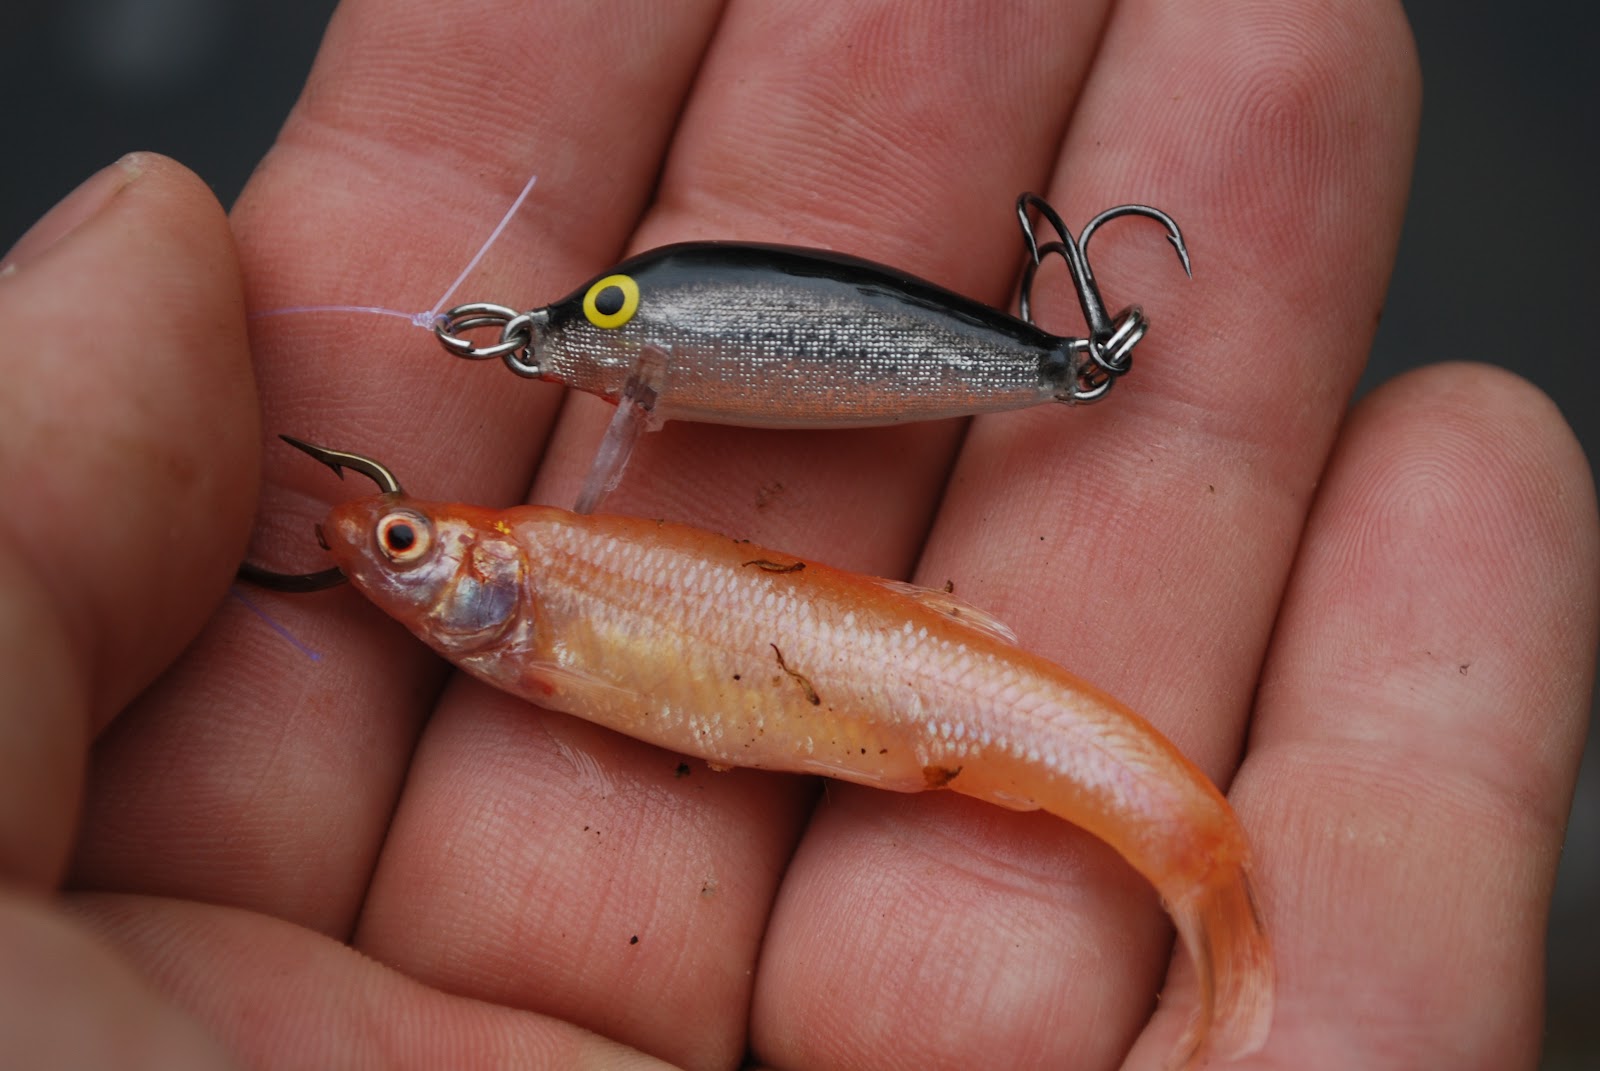 Litton's Fishing Lines: Brown Trout on Rapalas and Fathead Minnows